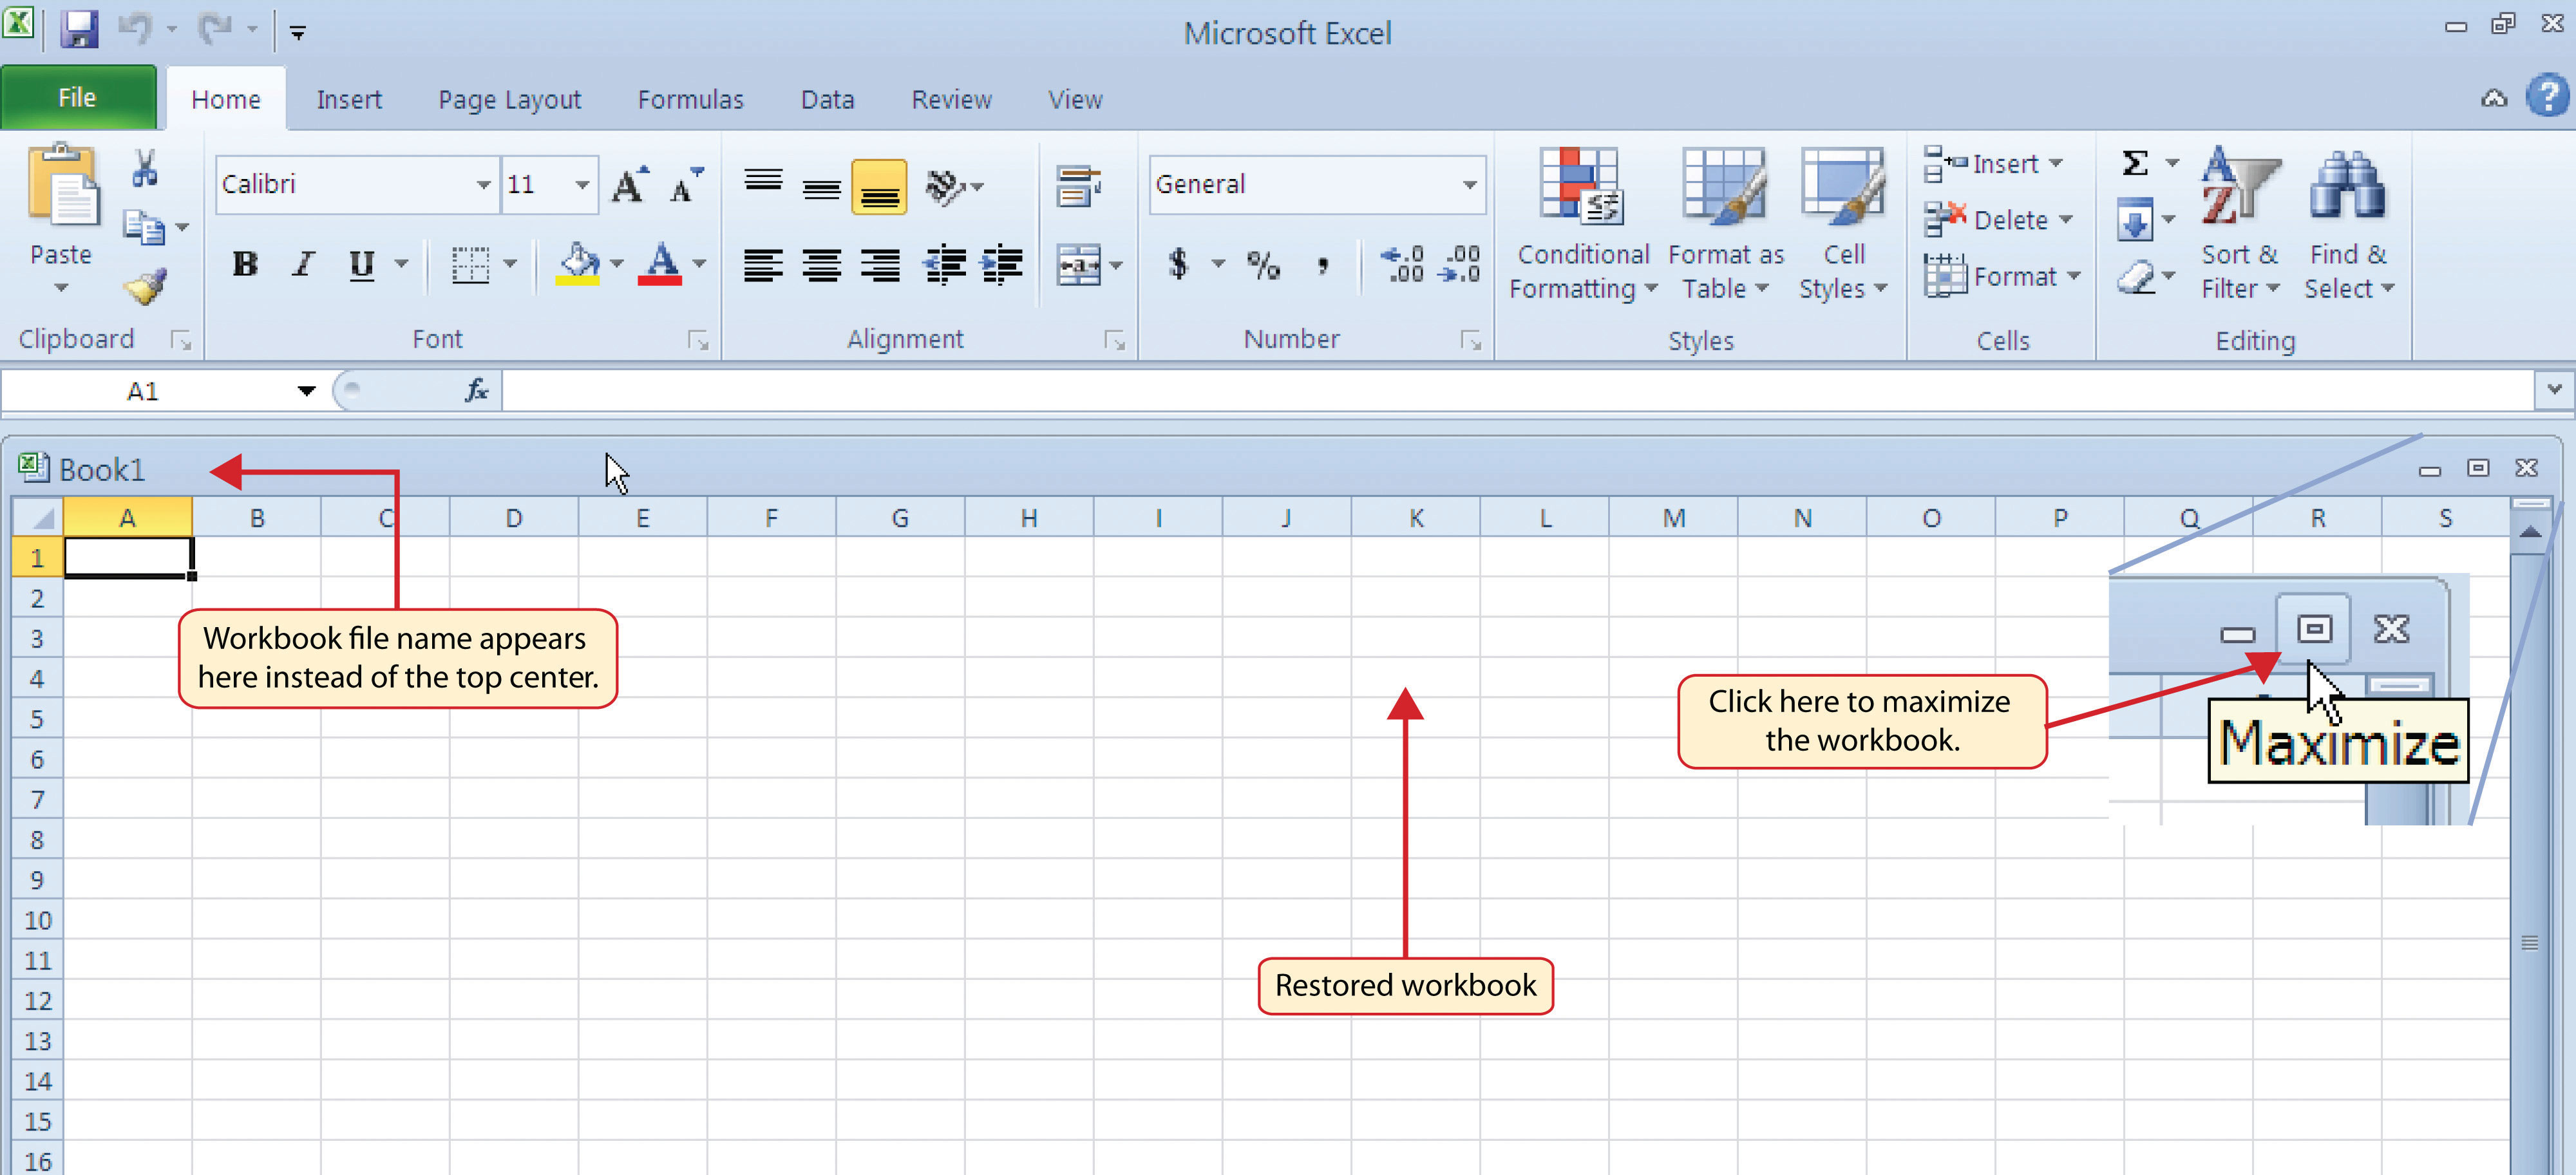 An Overview Of Microsoft Excel 